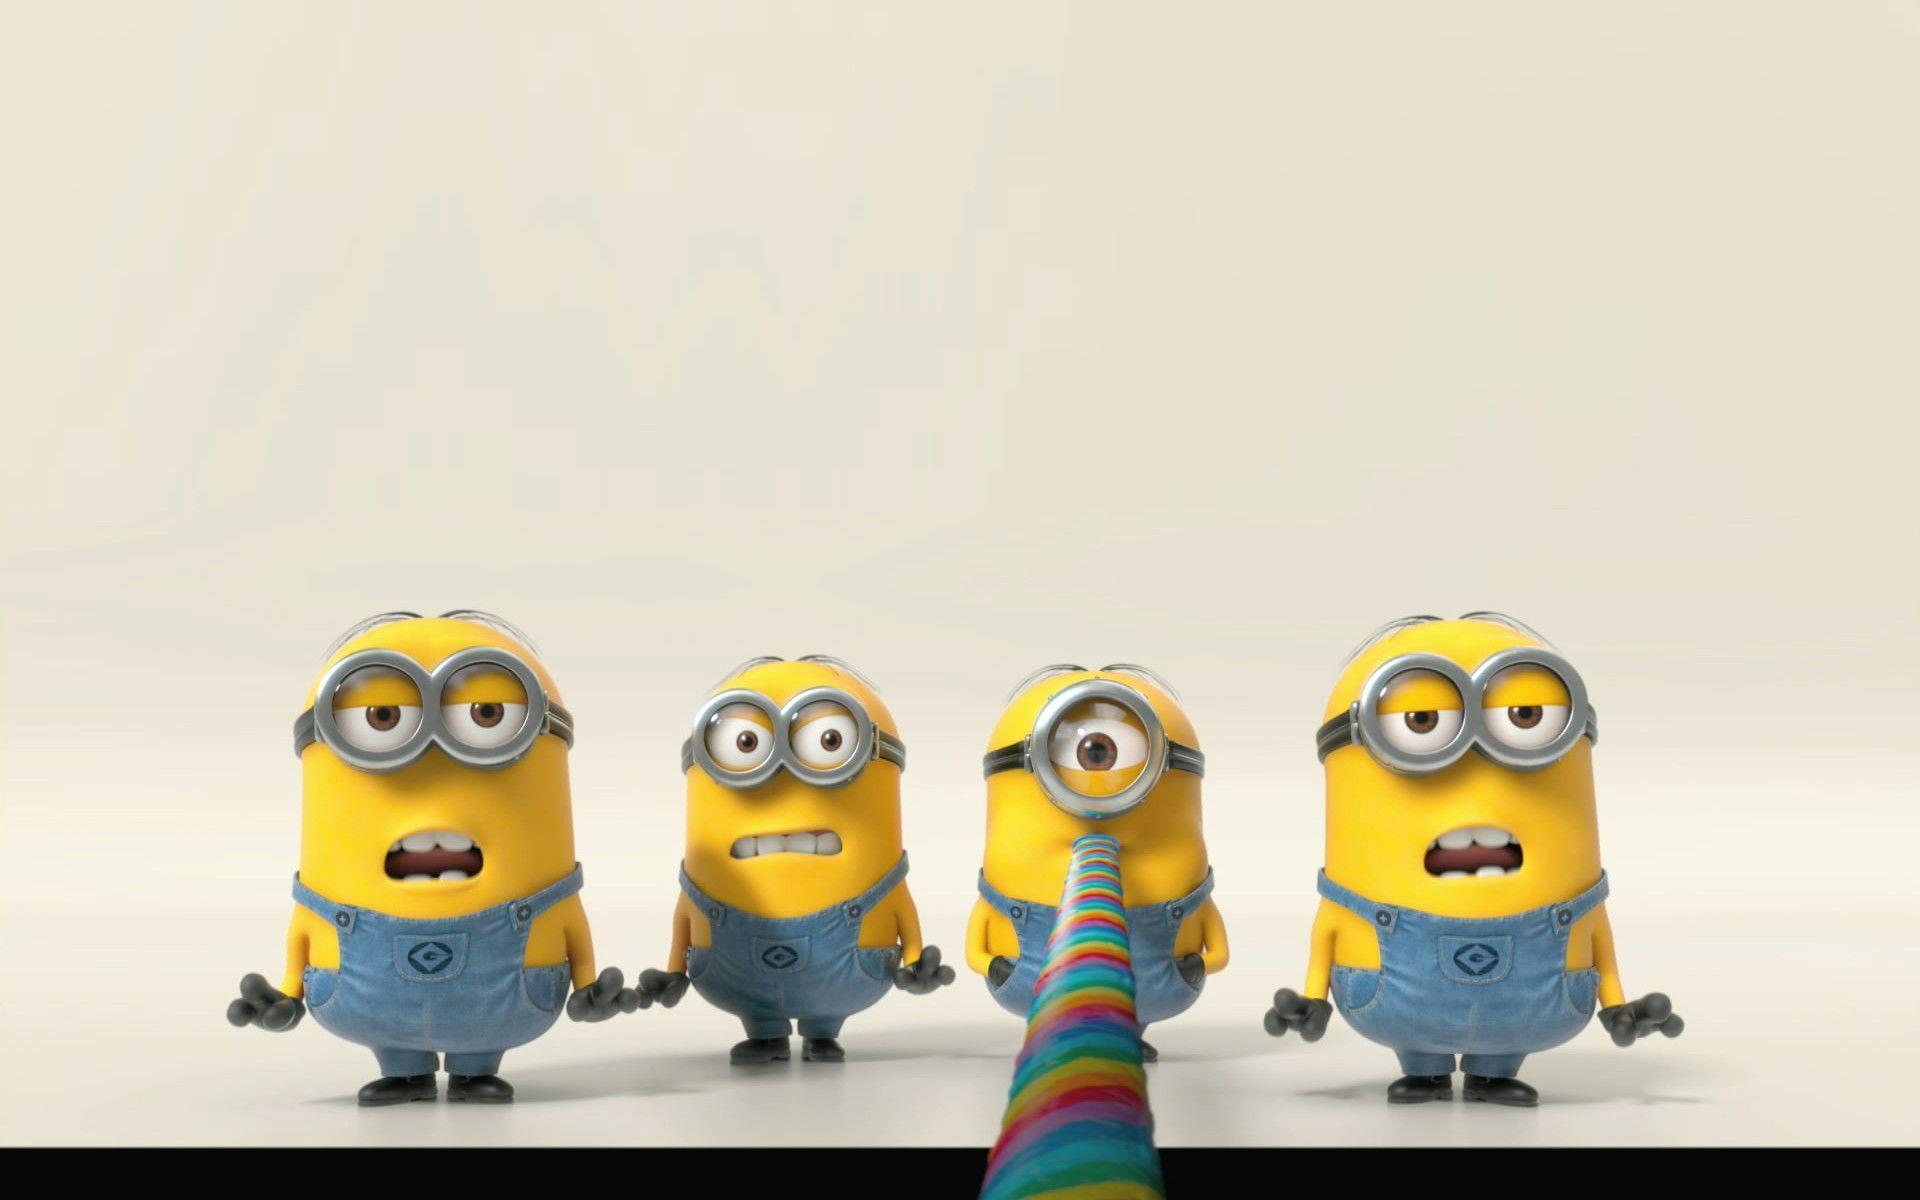 Minion Wallpaper and HD Background. Download Here